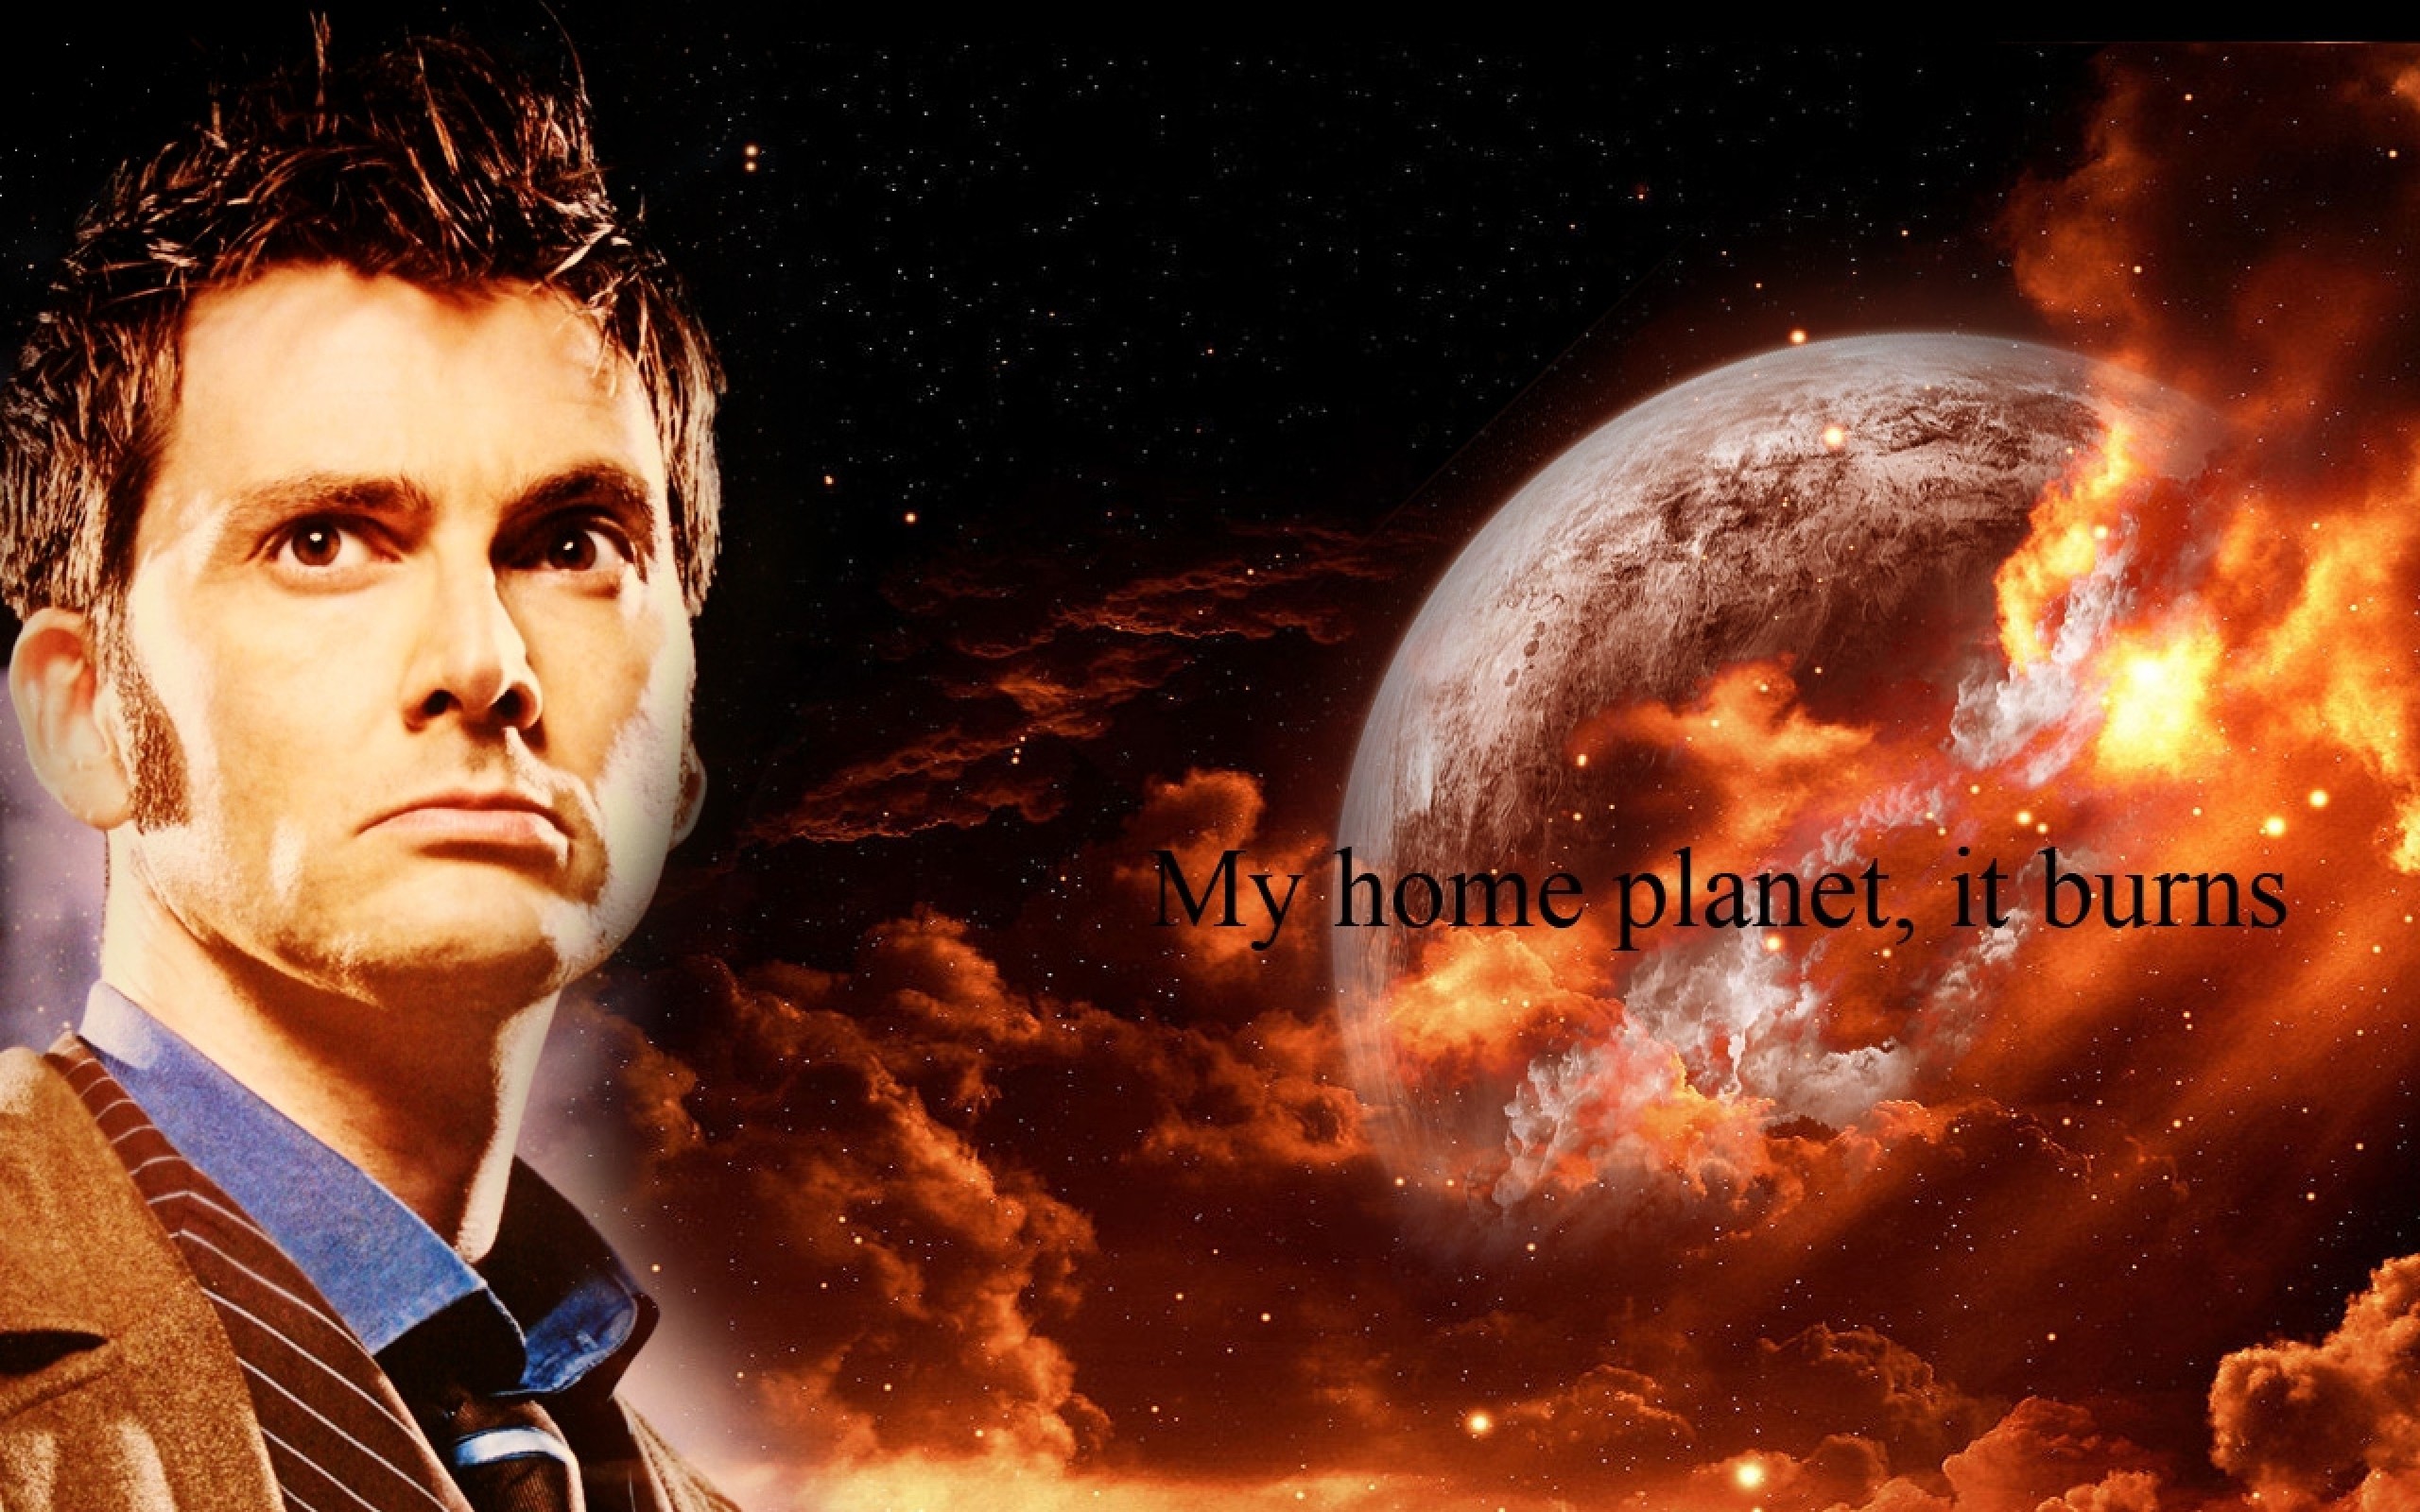 Doctor Who, The Doctor, TARDIS, David Tennant, Gallifrey, Tenth Doctor, Planet, Quote Wallpaper